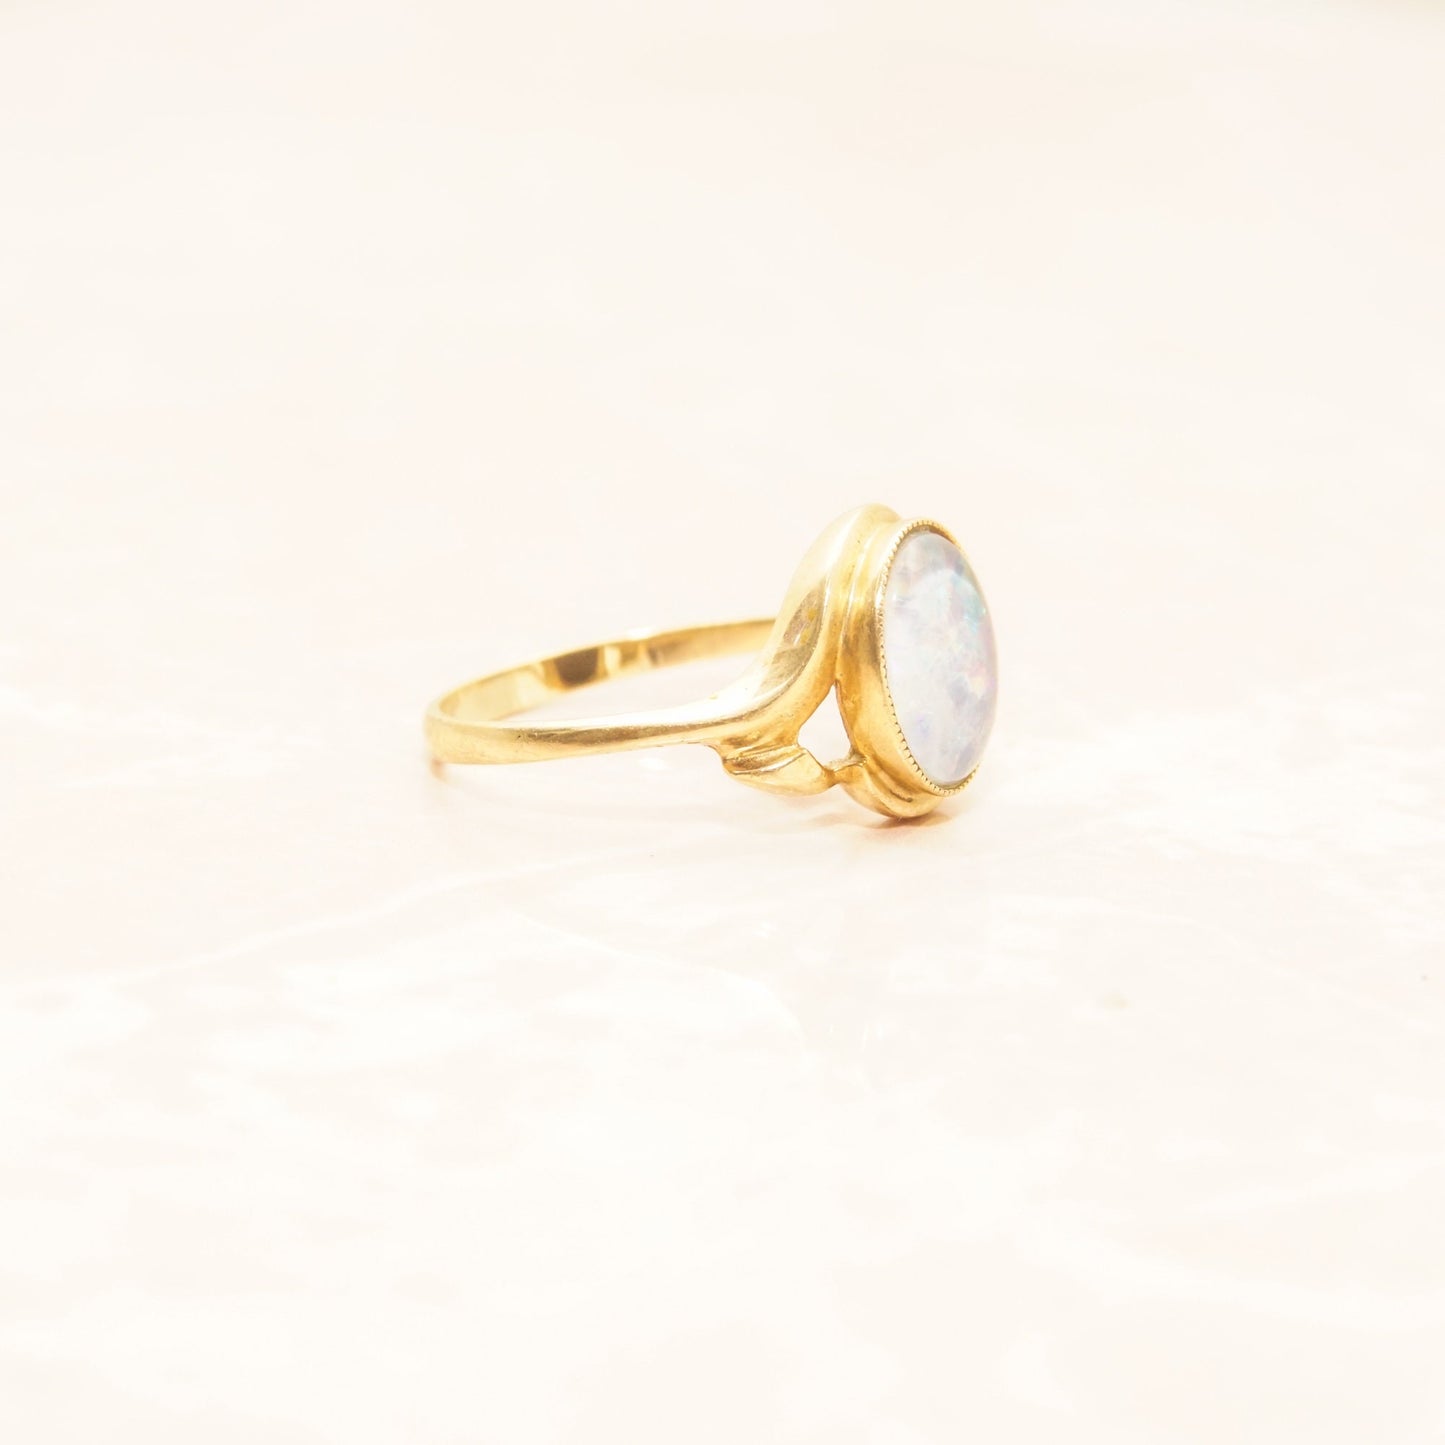 10K yellow gold opal triplet cocktail ring, estate jewelry, size 8 1/4 US